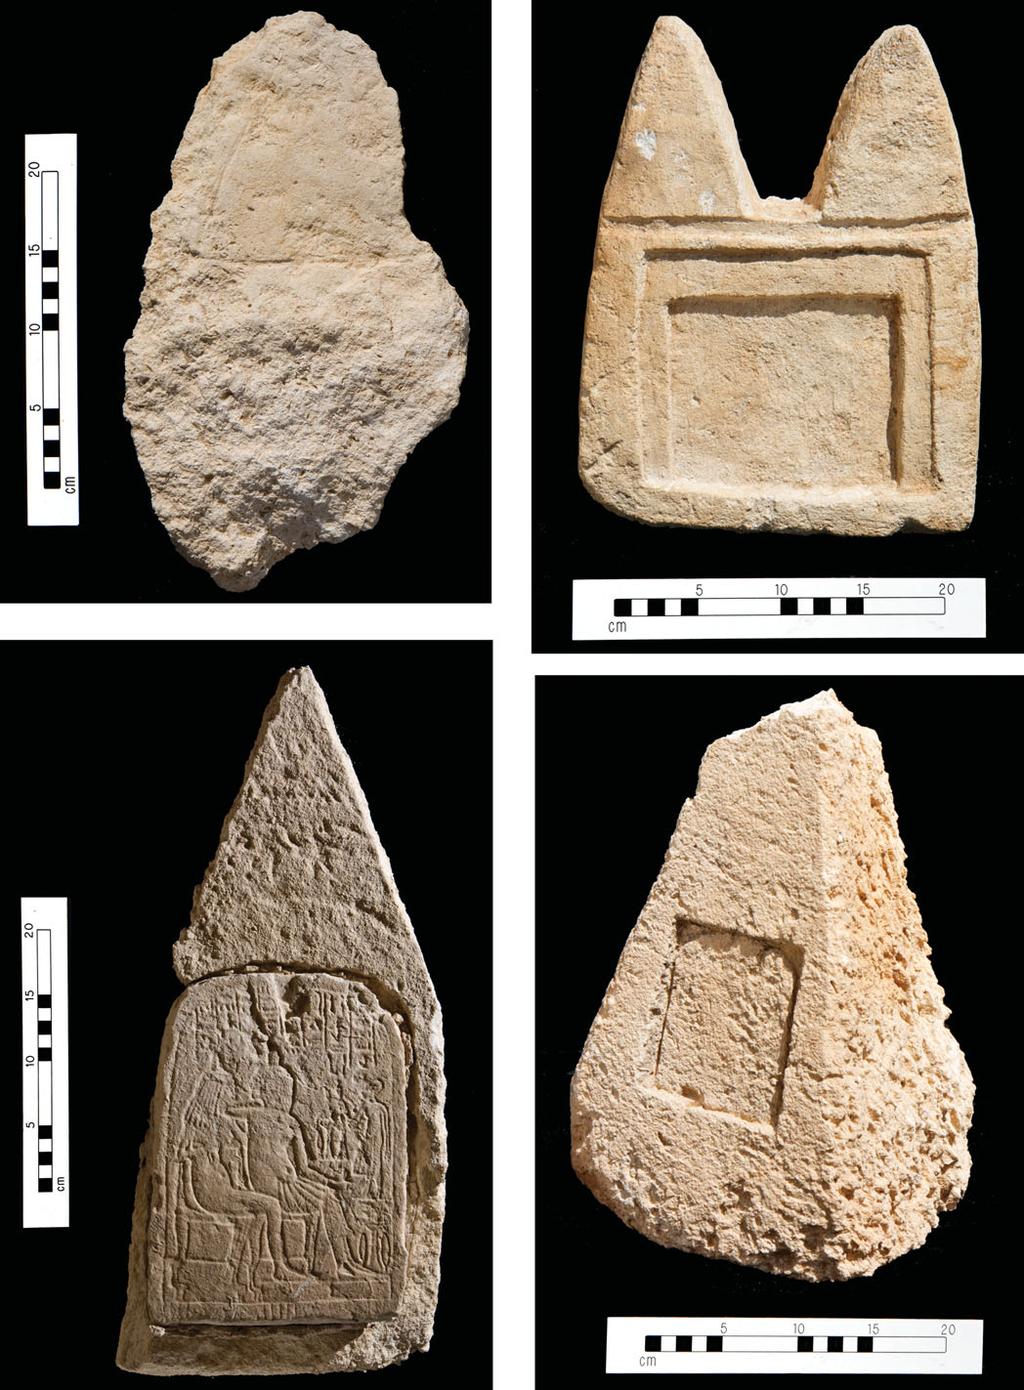 Barry Kemp et al. Research Figure 4. Limestone grave markers with typical pointed tops: a roughly faced slab with engraved triangular motif (obj.